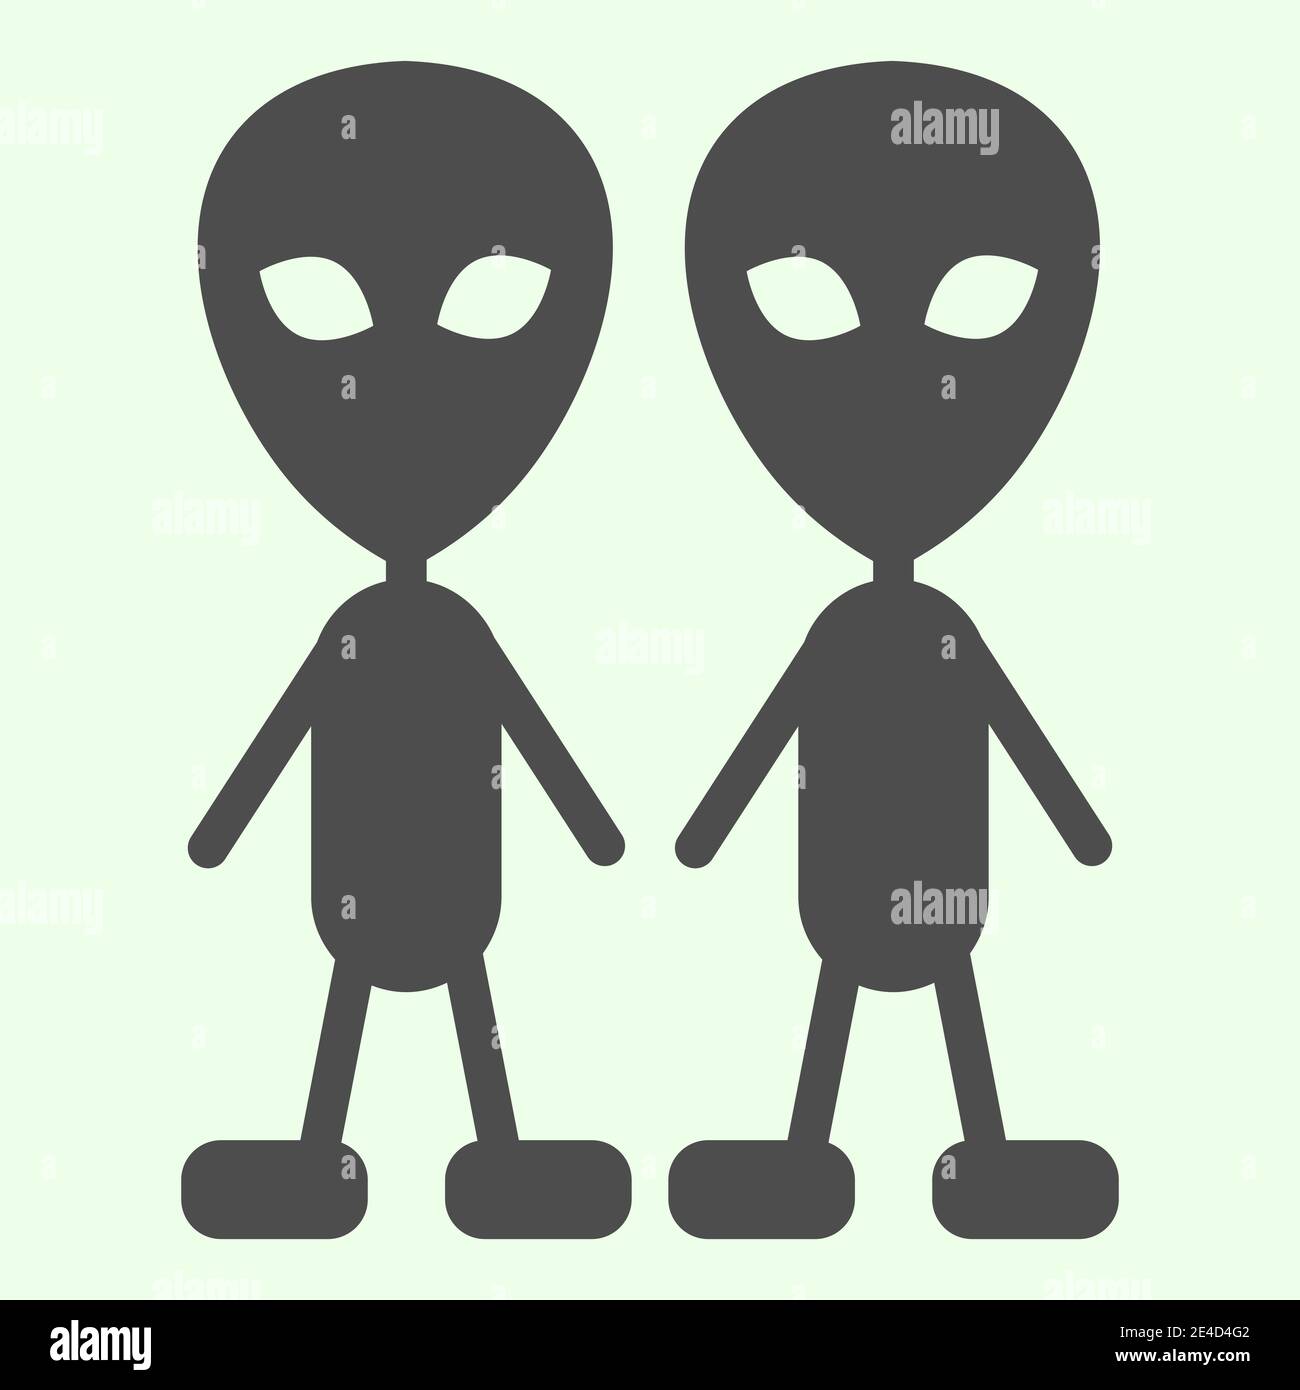 Cosmic strangers solid icon. Two martian extraterrestrial aliens glyph style pictogram on white background. Exploration space signs for mobile concept Stock Vector